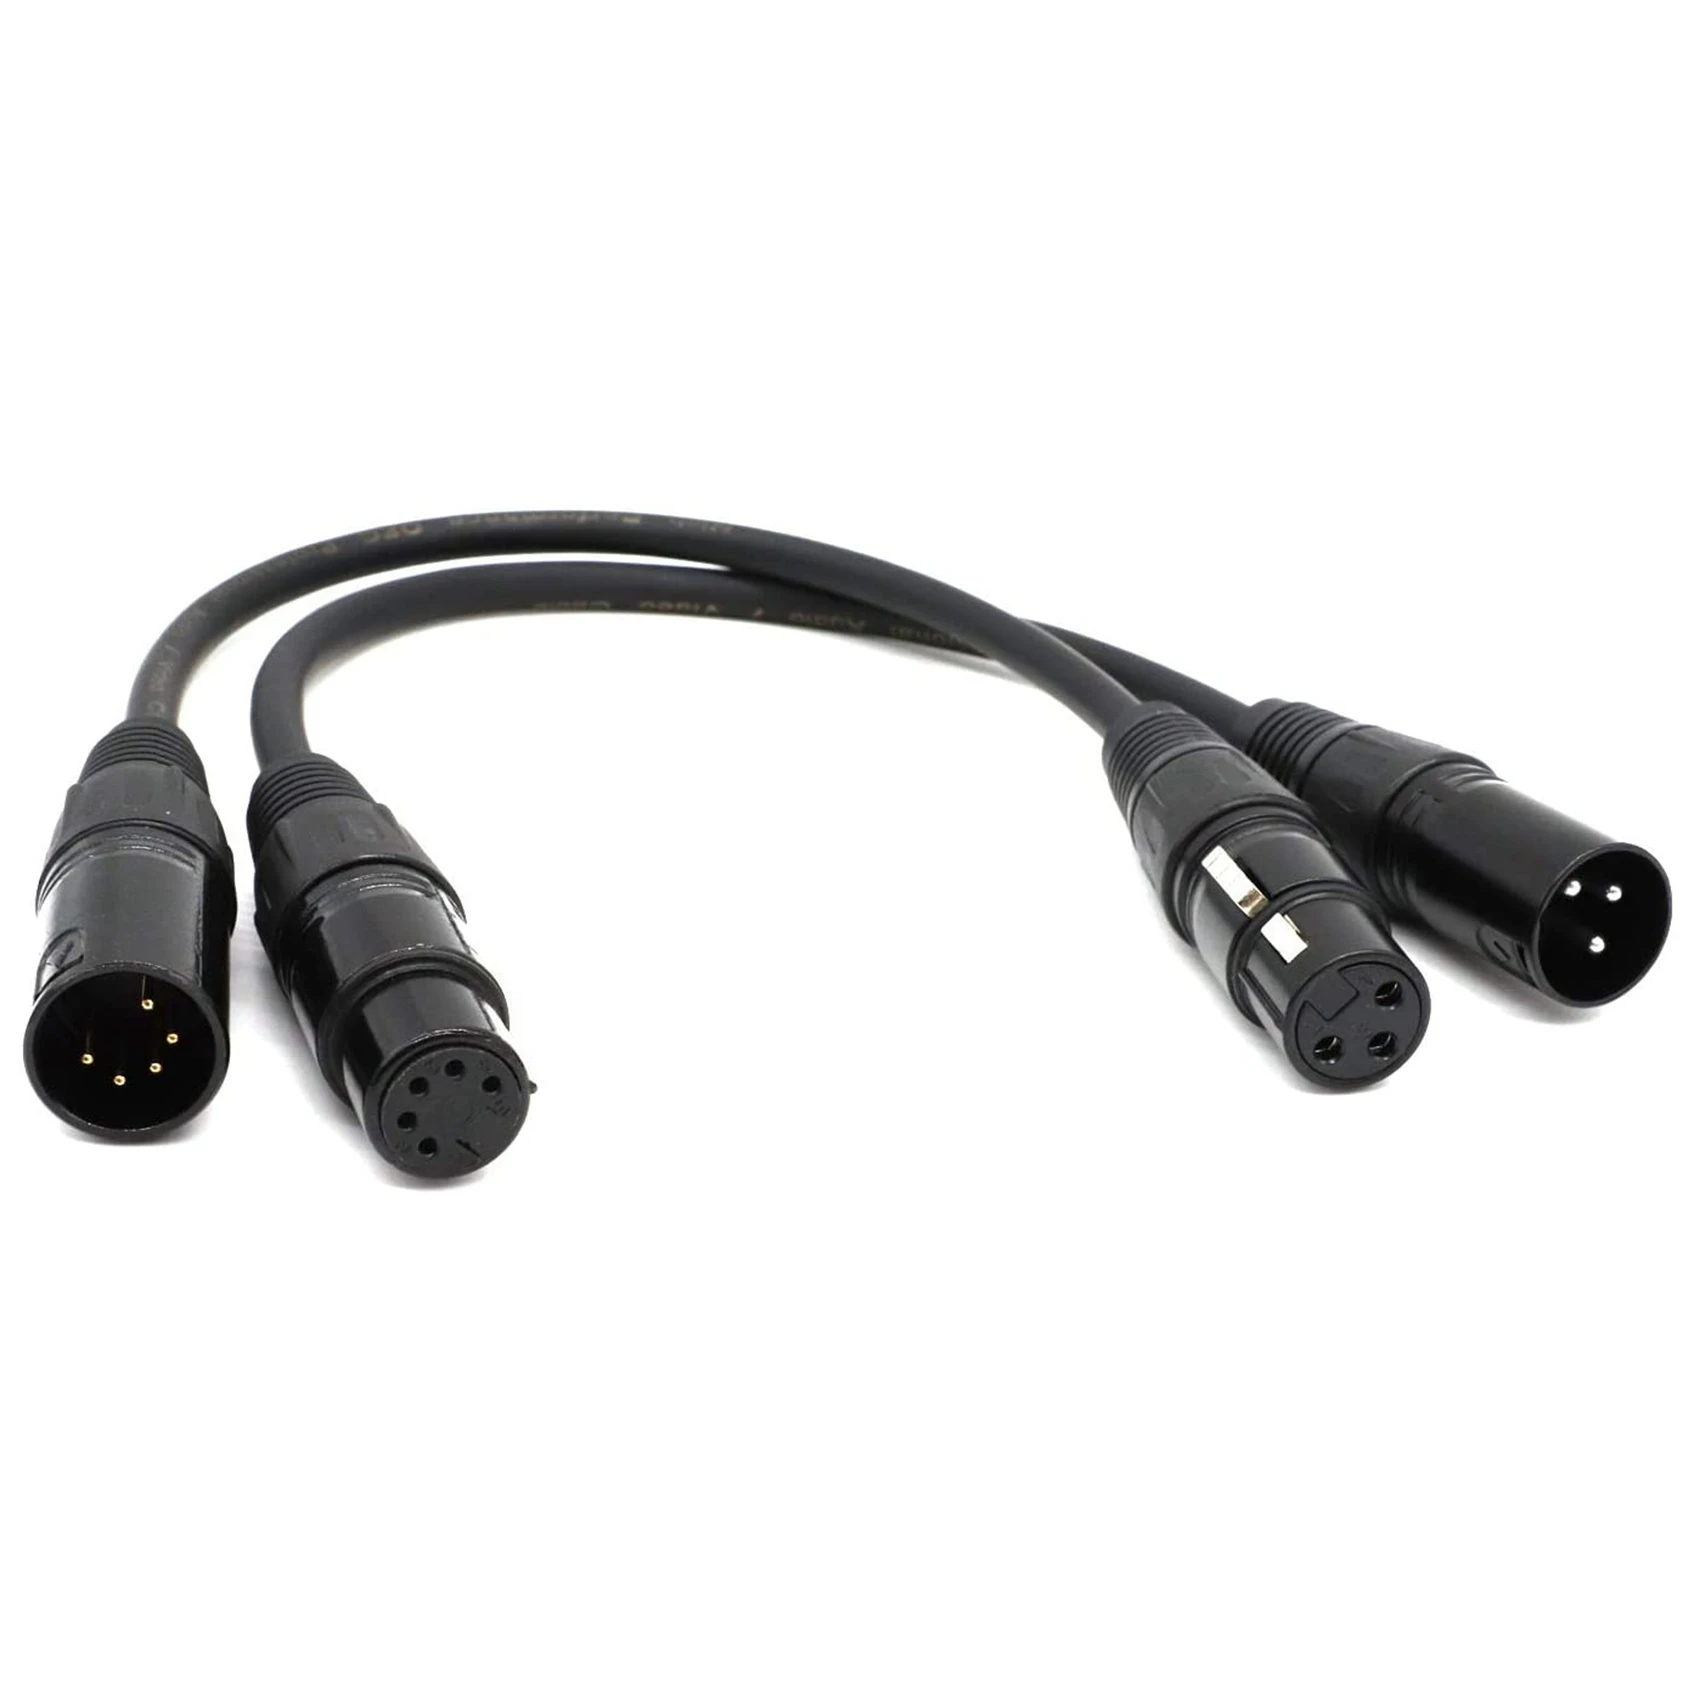 

XLR Male 3 Pin to XLR Female 5 Pin & XLR Female 3 Pin to XLR Male 5 Pin Audio Cable, for Microphone DMX Stage Light